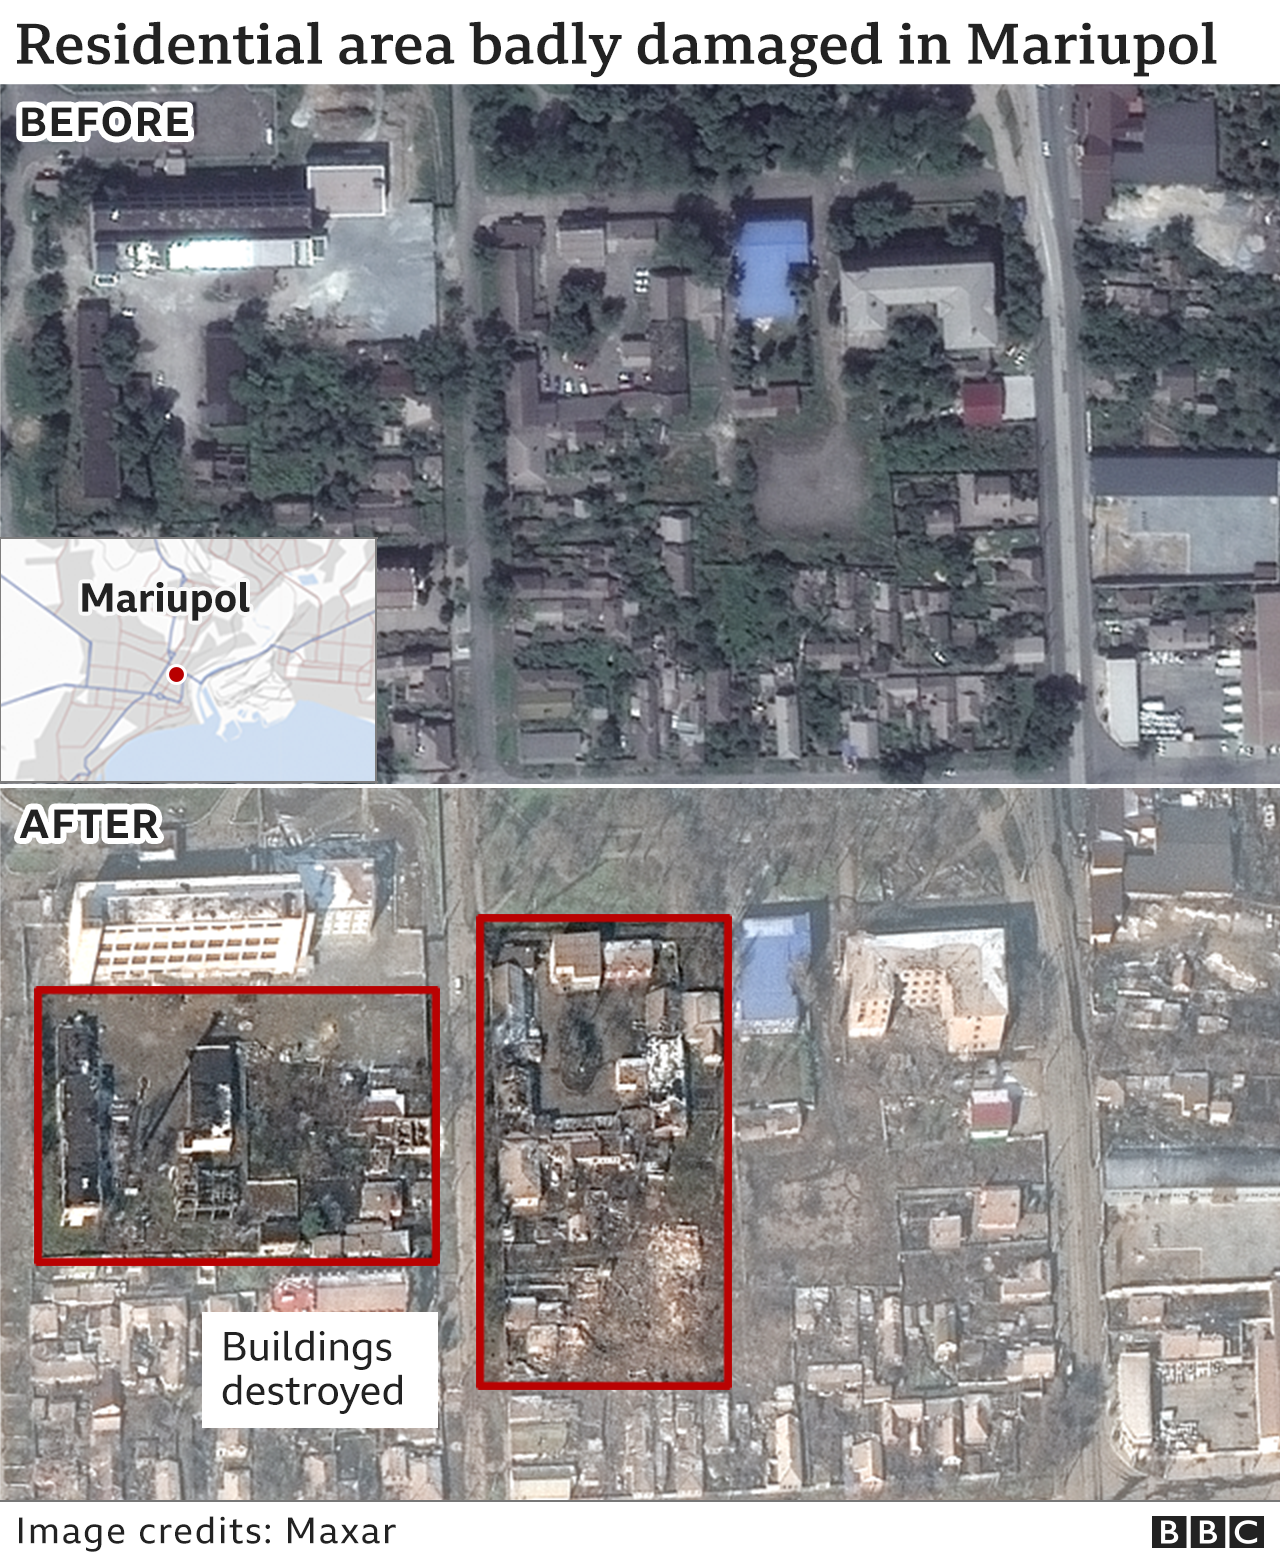 Satellite images showing damage to homes in Mariupol